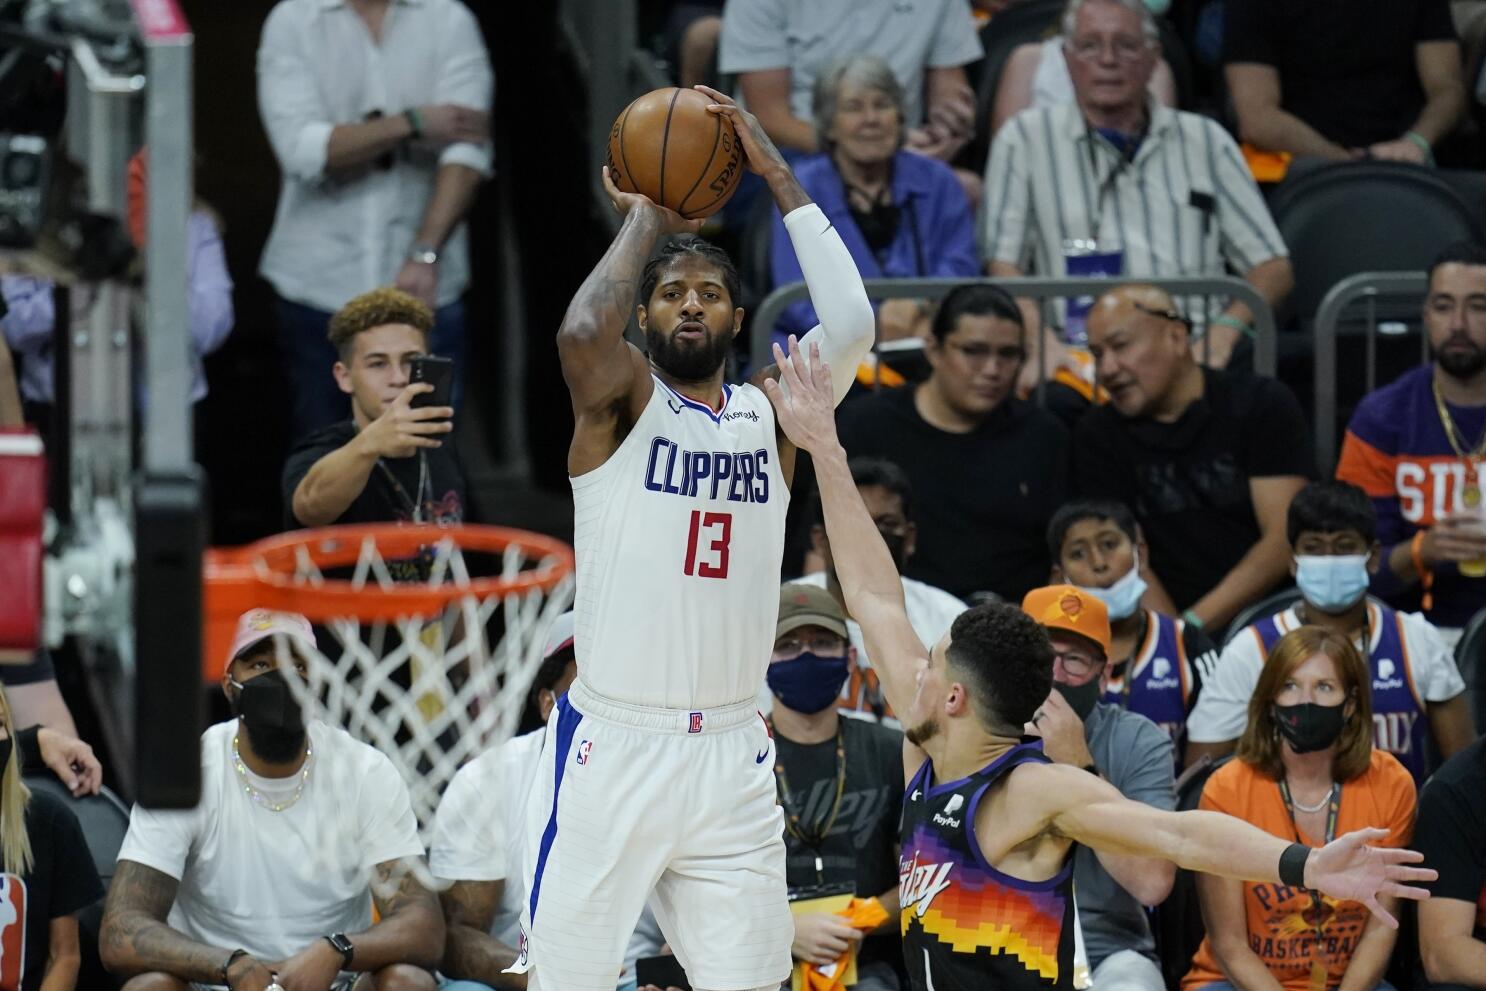 New Clippers teammates Rajon Rondo and DeMarcus Cousins are back together  again, and it still works - Clips Nation